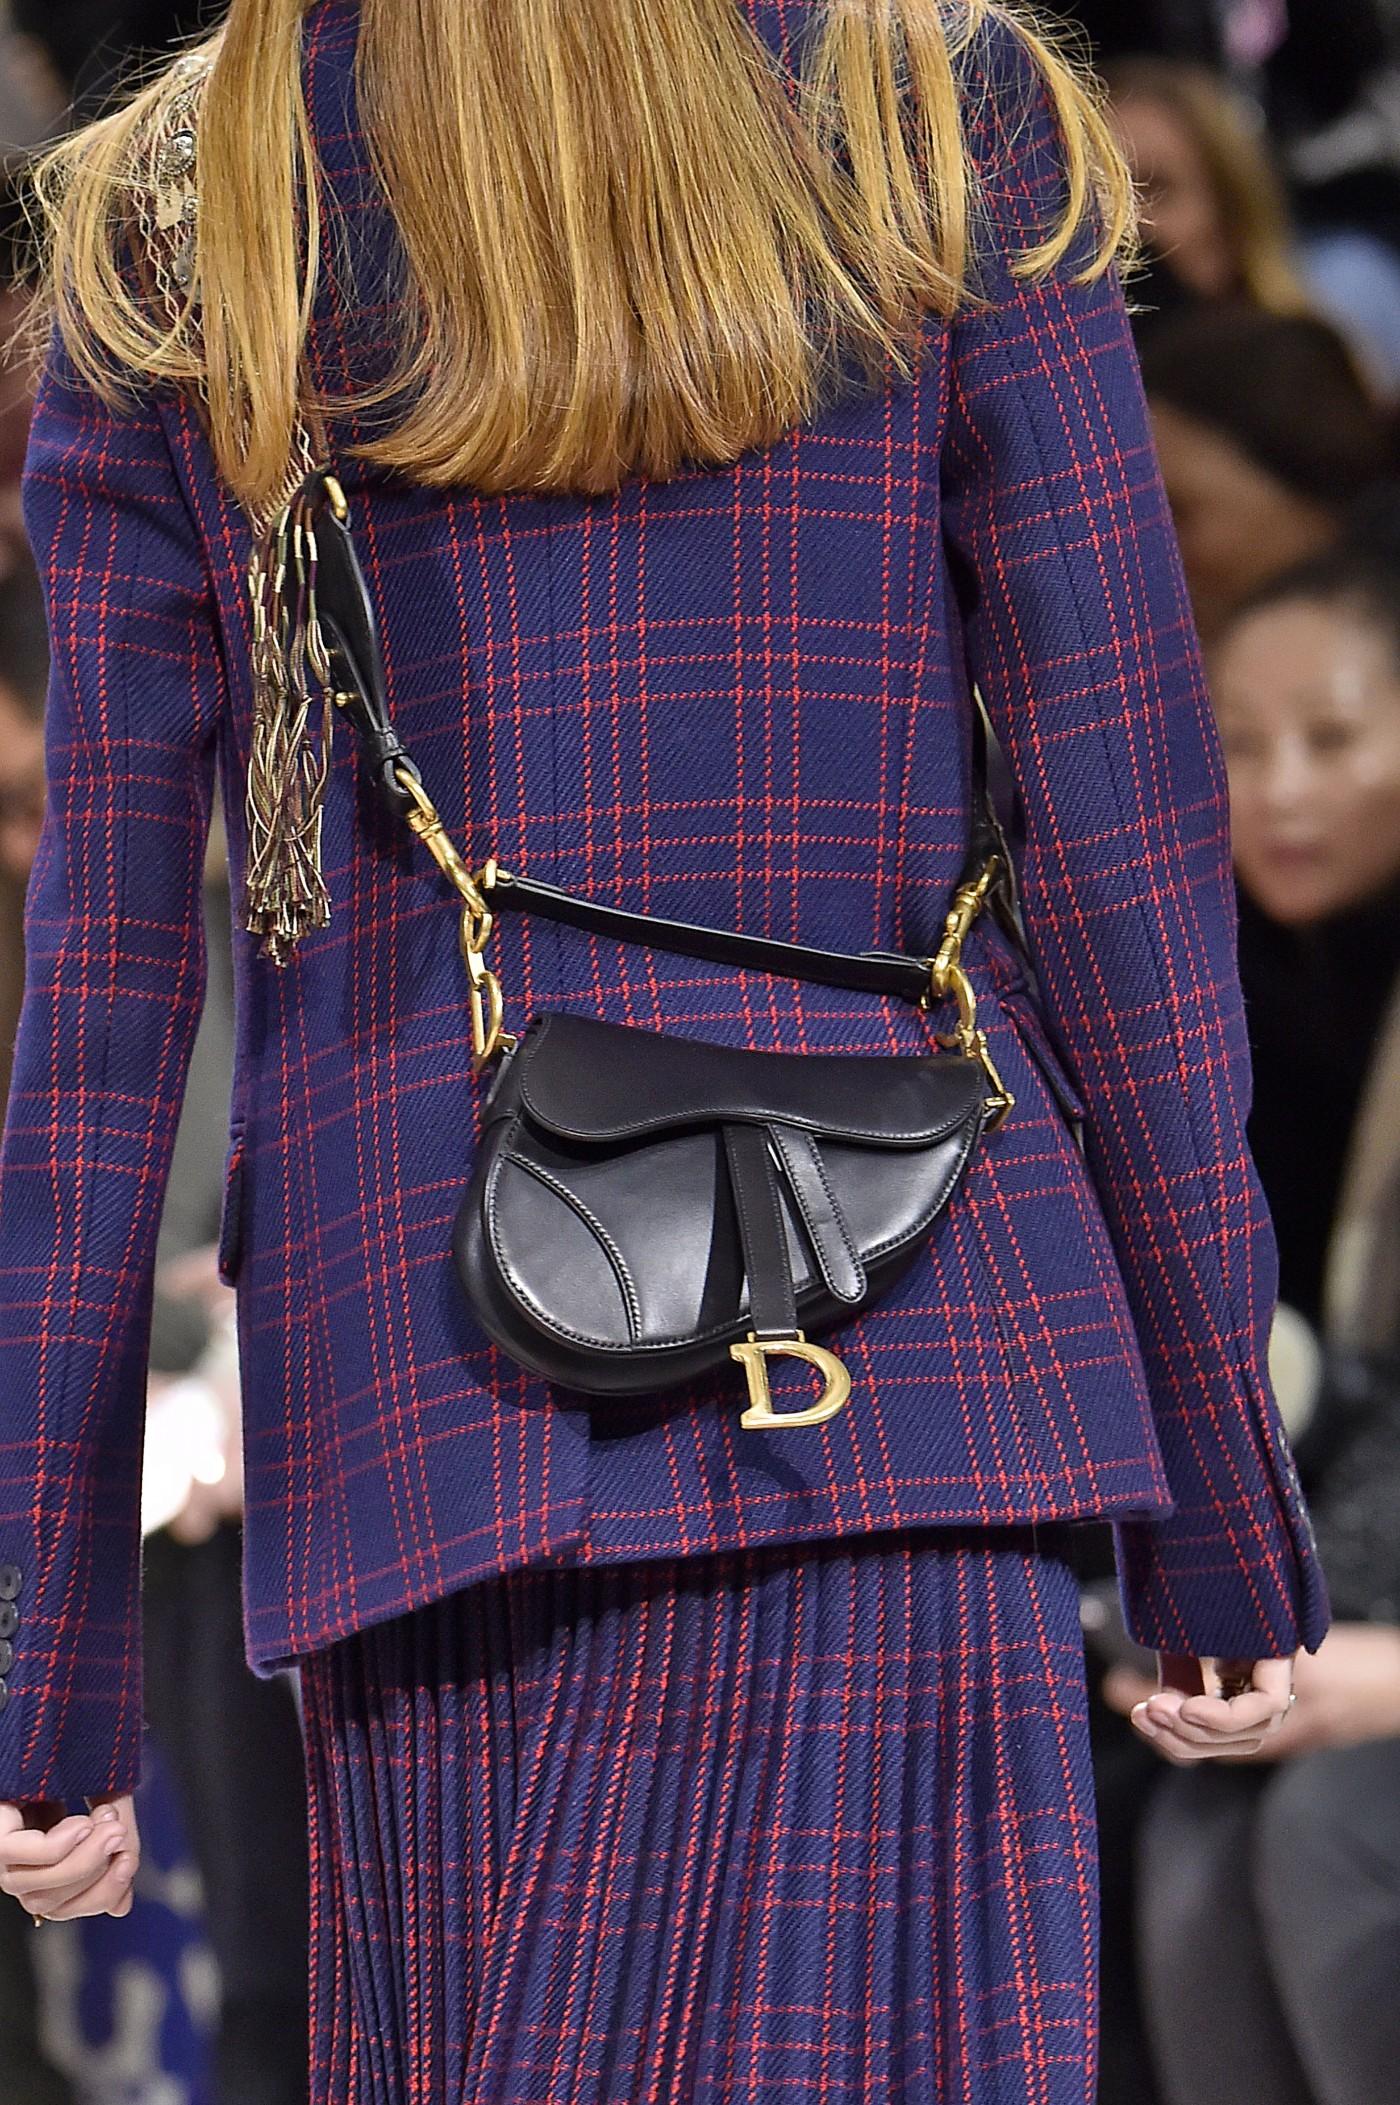 Dior has brought back its iconic saddle bag! 